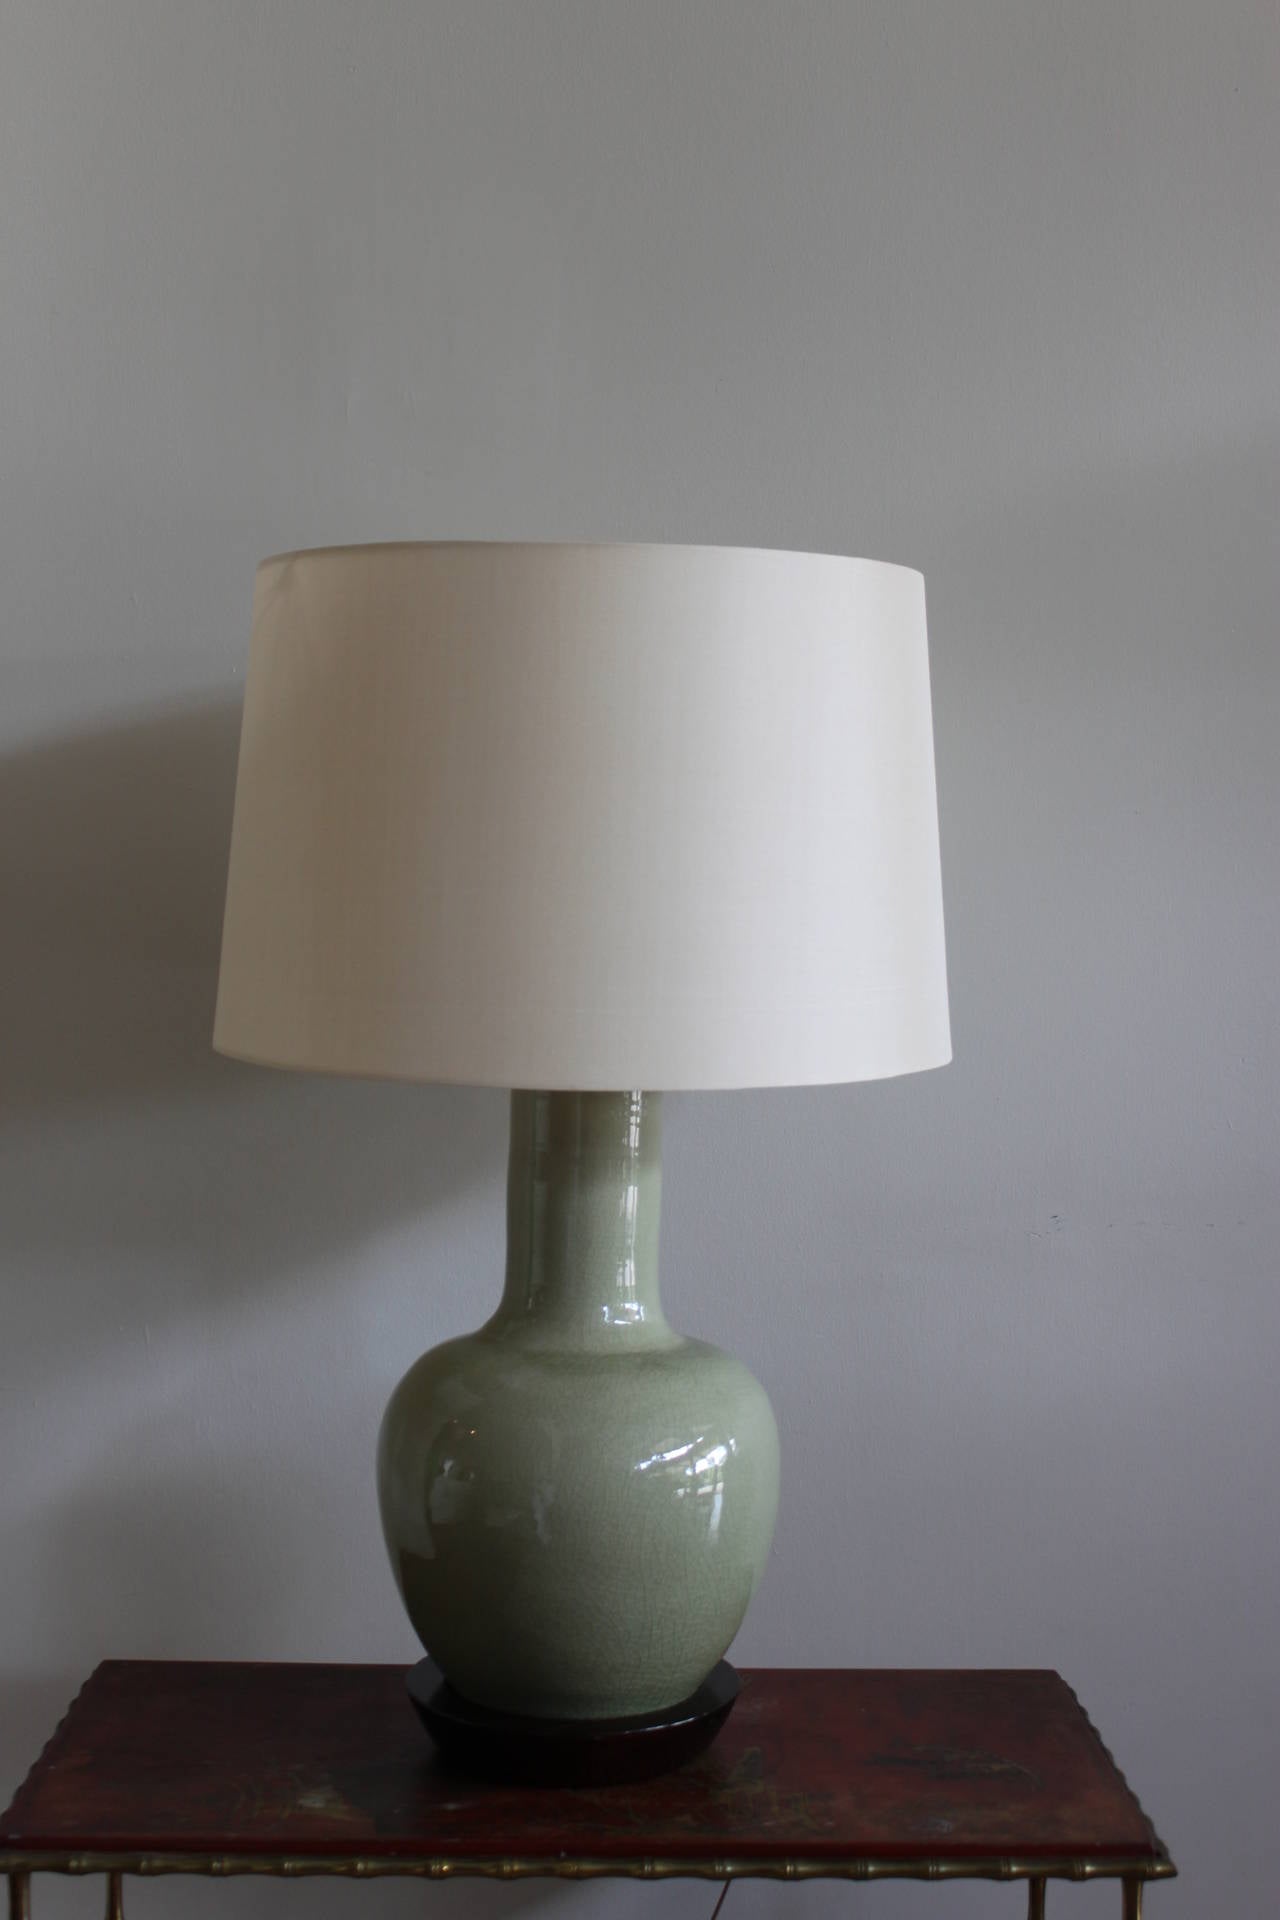 Striking midcentury modern gourd form celadon or pale green lamp with a crackle glaze and original harp and finial.  The lamp is large and beautifully proportioned with a vintage wood base.  Includes a new modern silk shade.